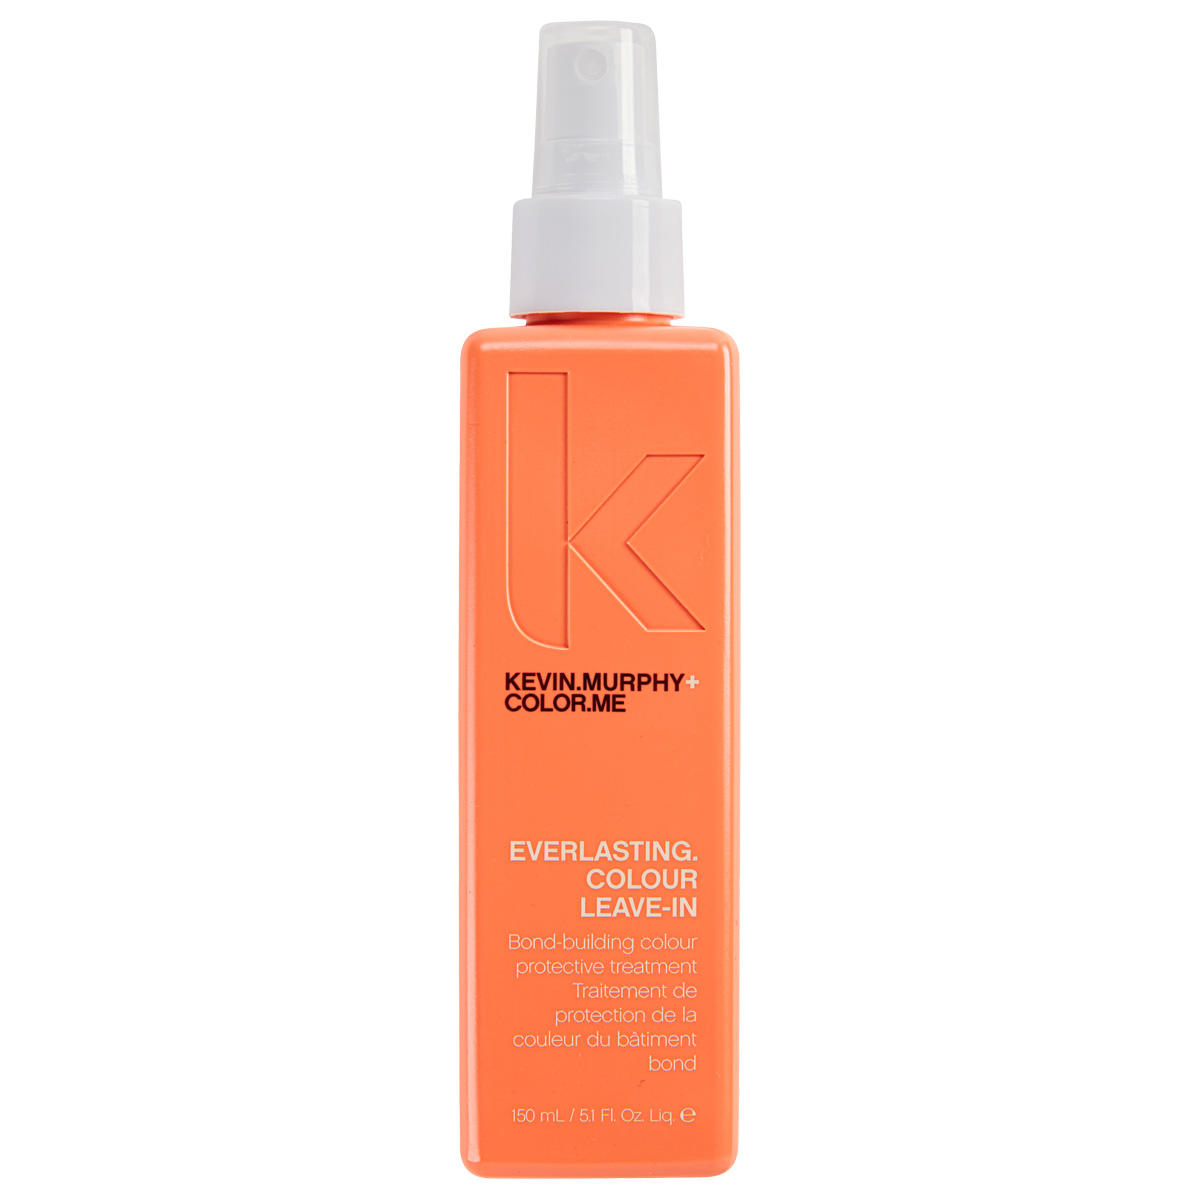 KEVIN.MURPHY EVERLASTING.COLOUR LEAVE-IN 150 ml - 1